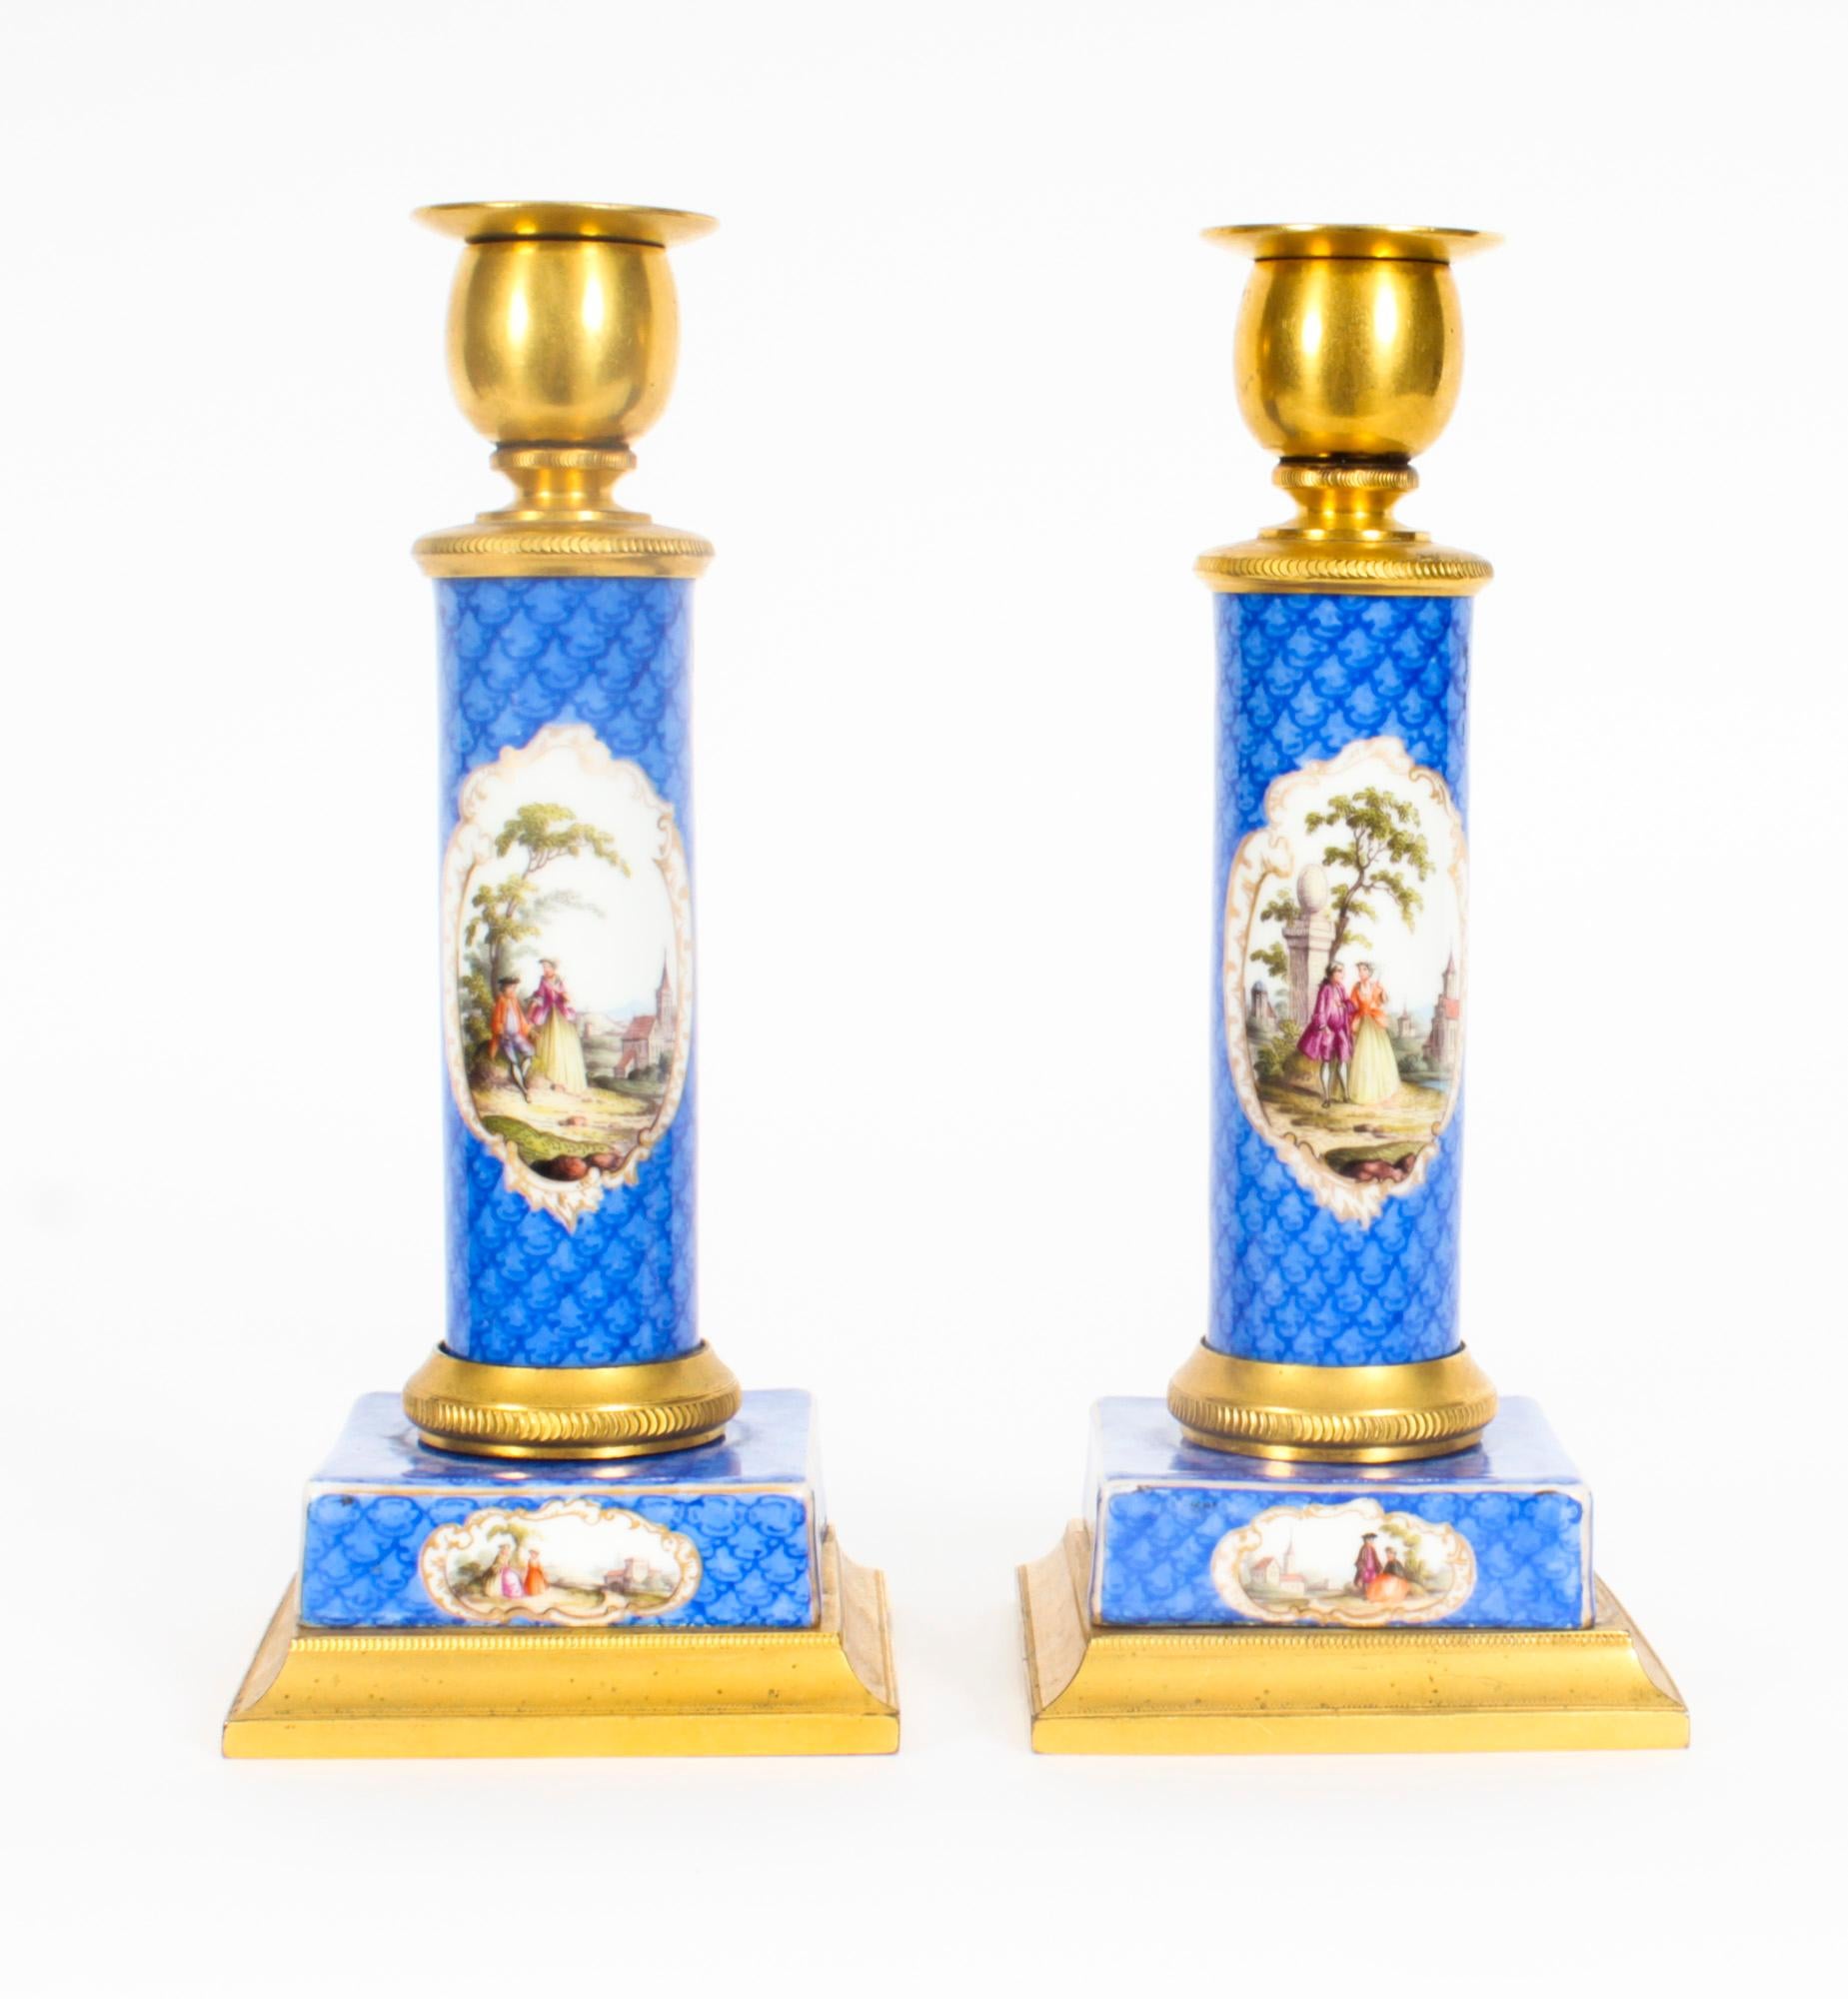 This is a delightful antique pair of 19th century French Sevres porcelain mounted ormolu candlesticks, C1870 in date.
 
The square bases and plain column stems with tulip sconces decorated with romantic classical landscape panels on a blue scale